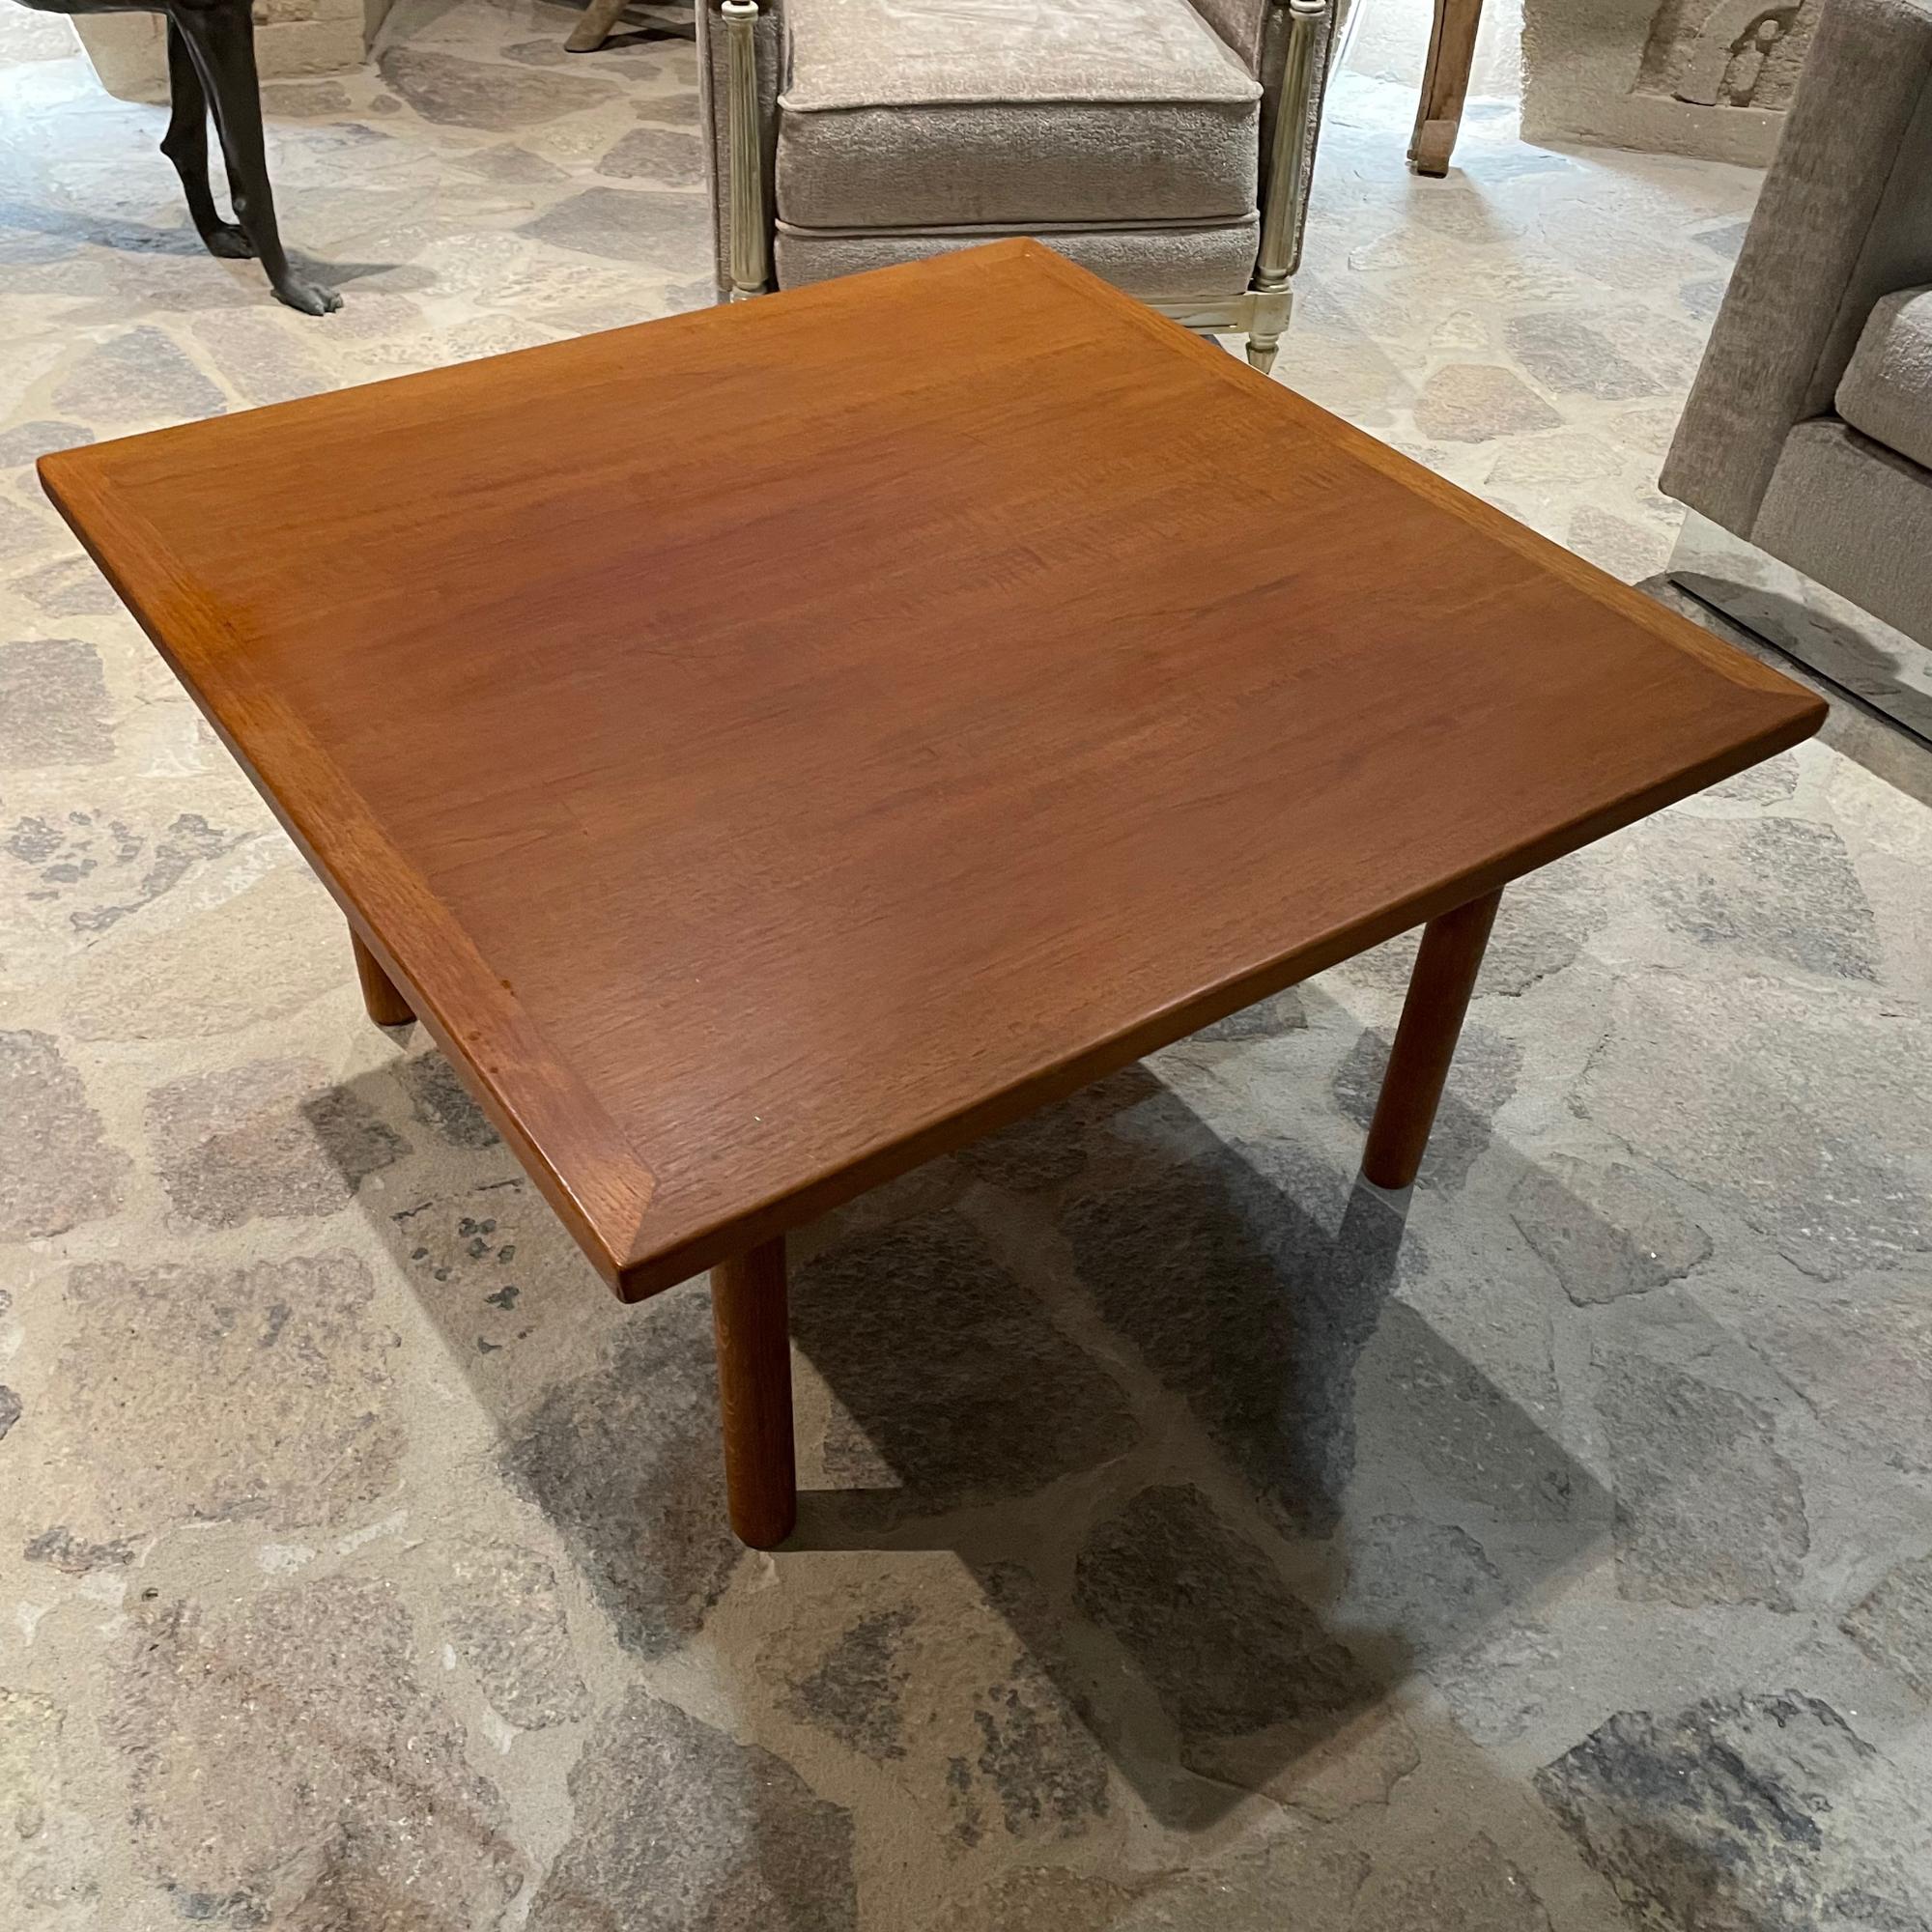 Coffee Table
1960s Danish Modern coffee table by HANS WEGNER features Teak Tabletop on Oak wood legs.
Legs can be removed for safe and easy shipping.
Unmarked
19 H x 33 .38x 33.38 inches
Restored with teak oil.
Original preowned vintage